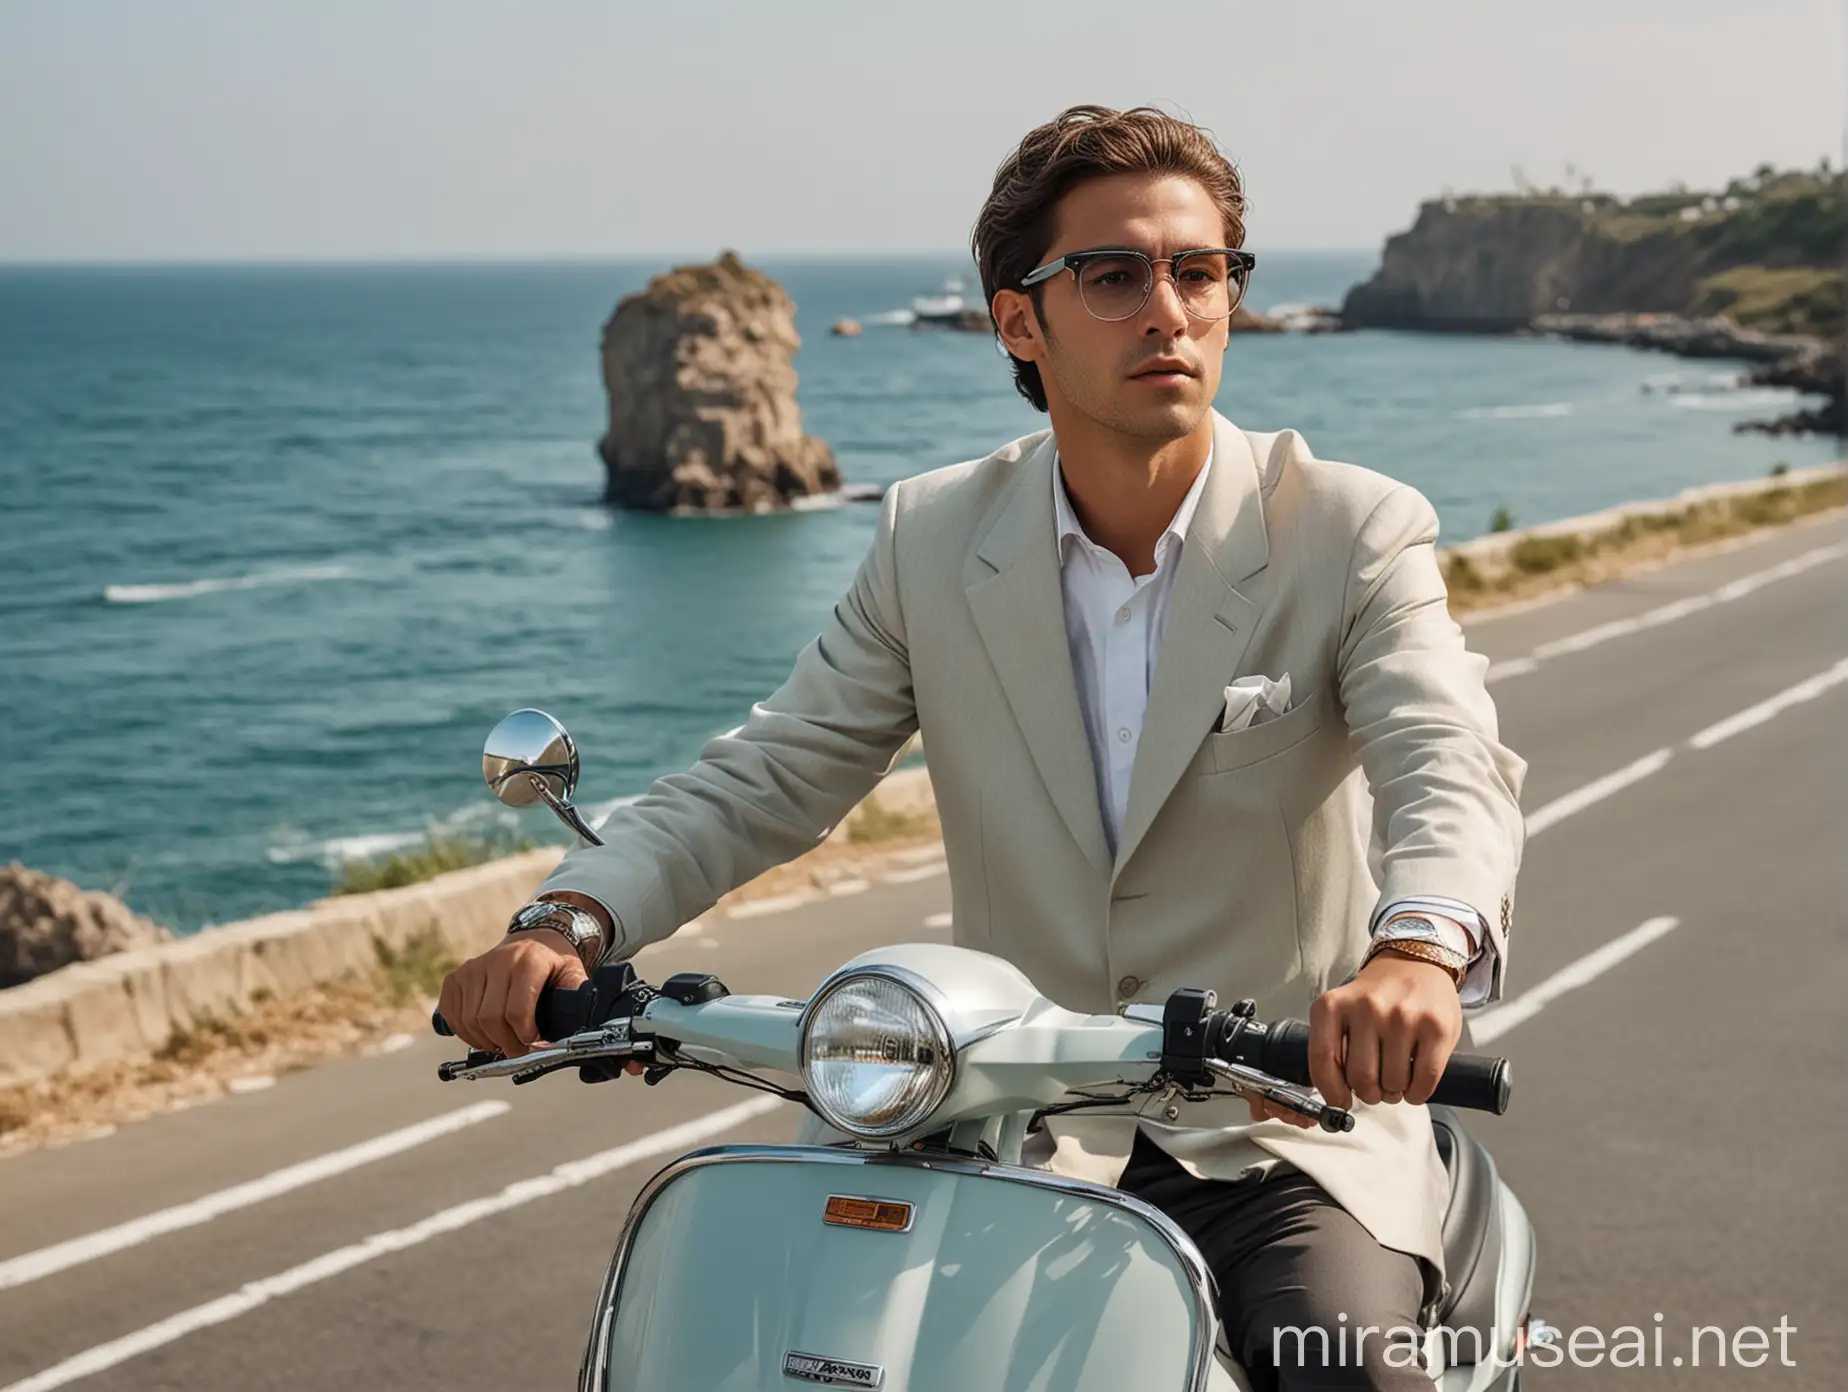 Man in Suit with Glasses Riding Scooter by the Sea